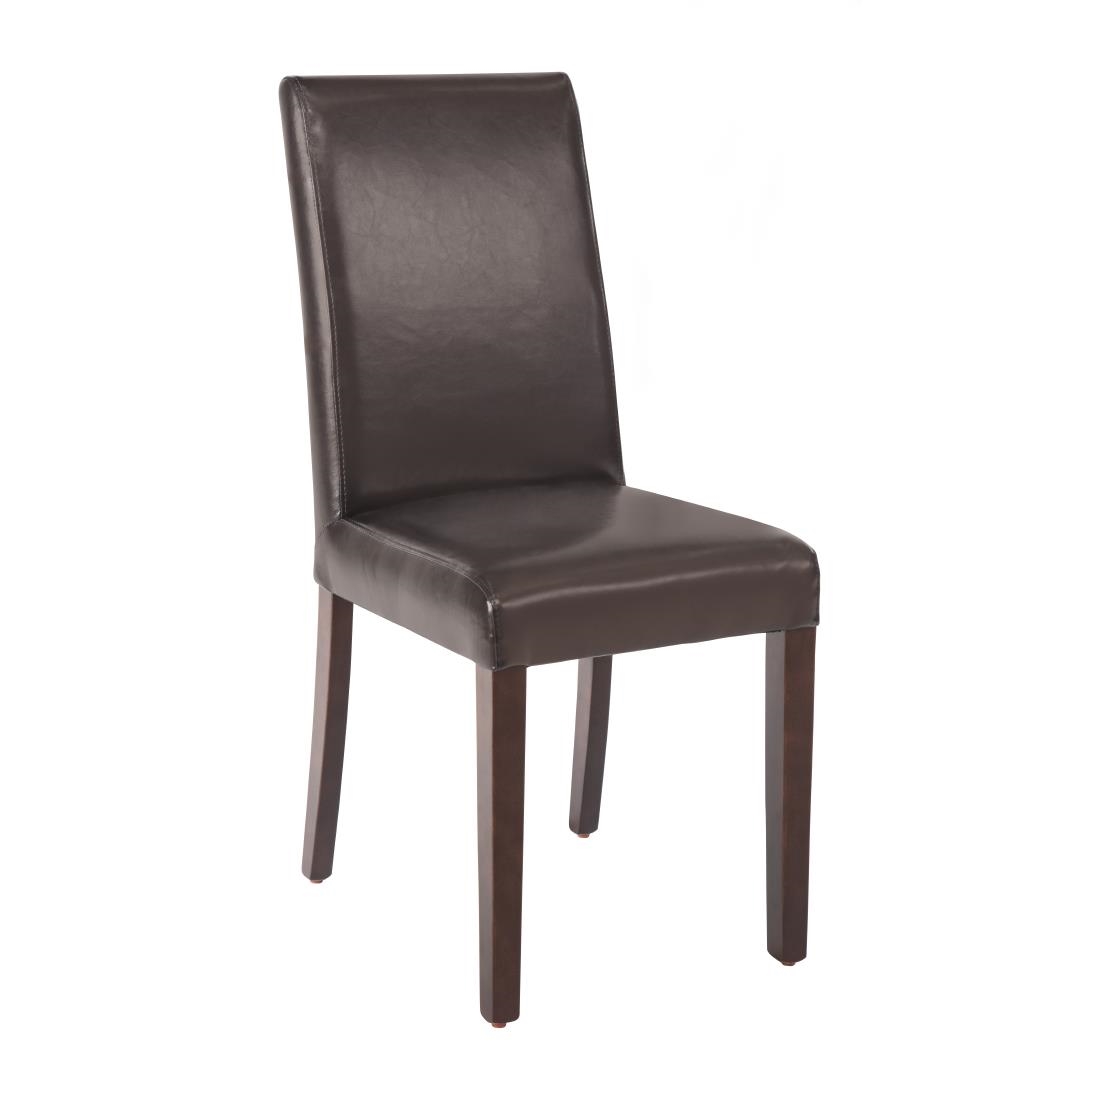 Faux Leather Dining Chair - Dark Brown